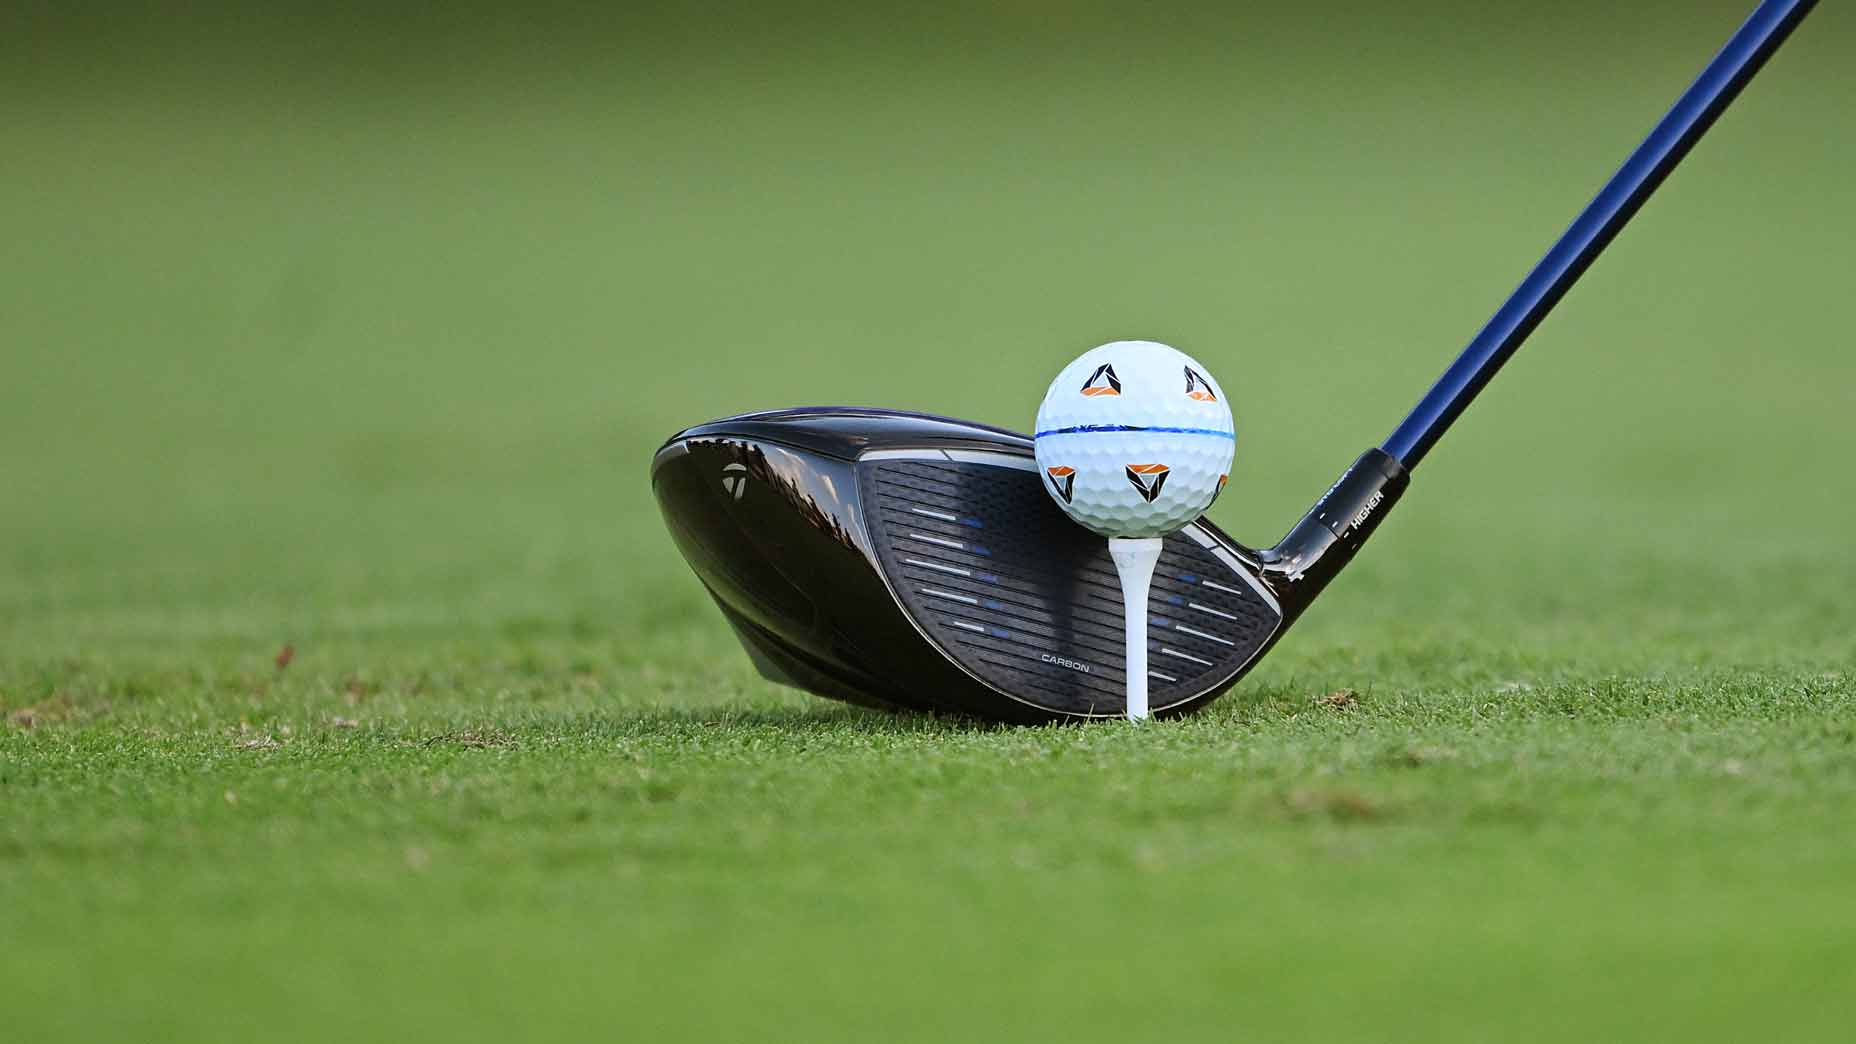 taylormade golf ball is teed up in front of a taylormade driver